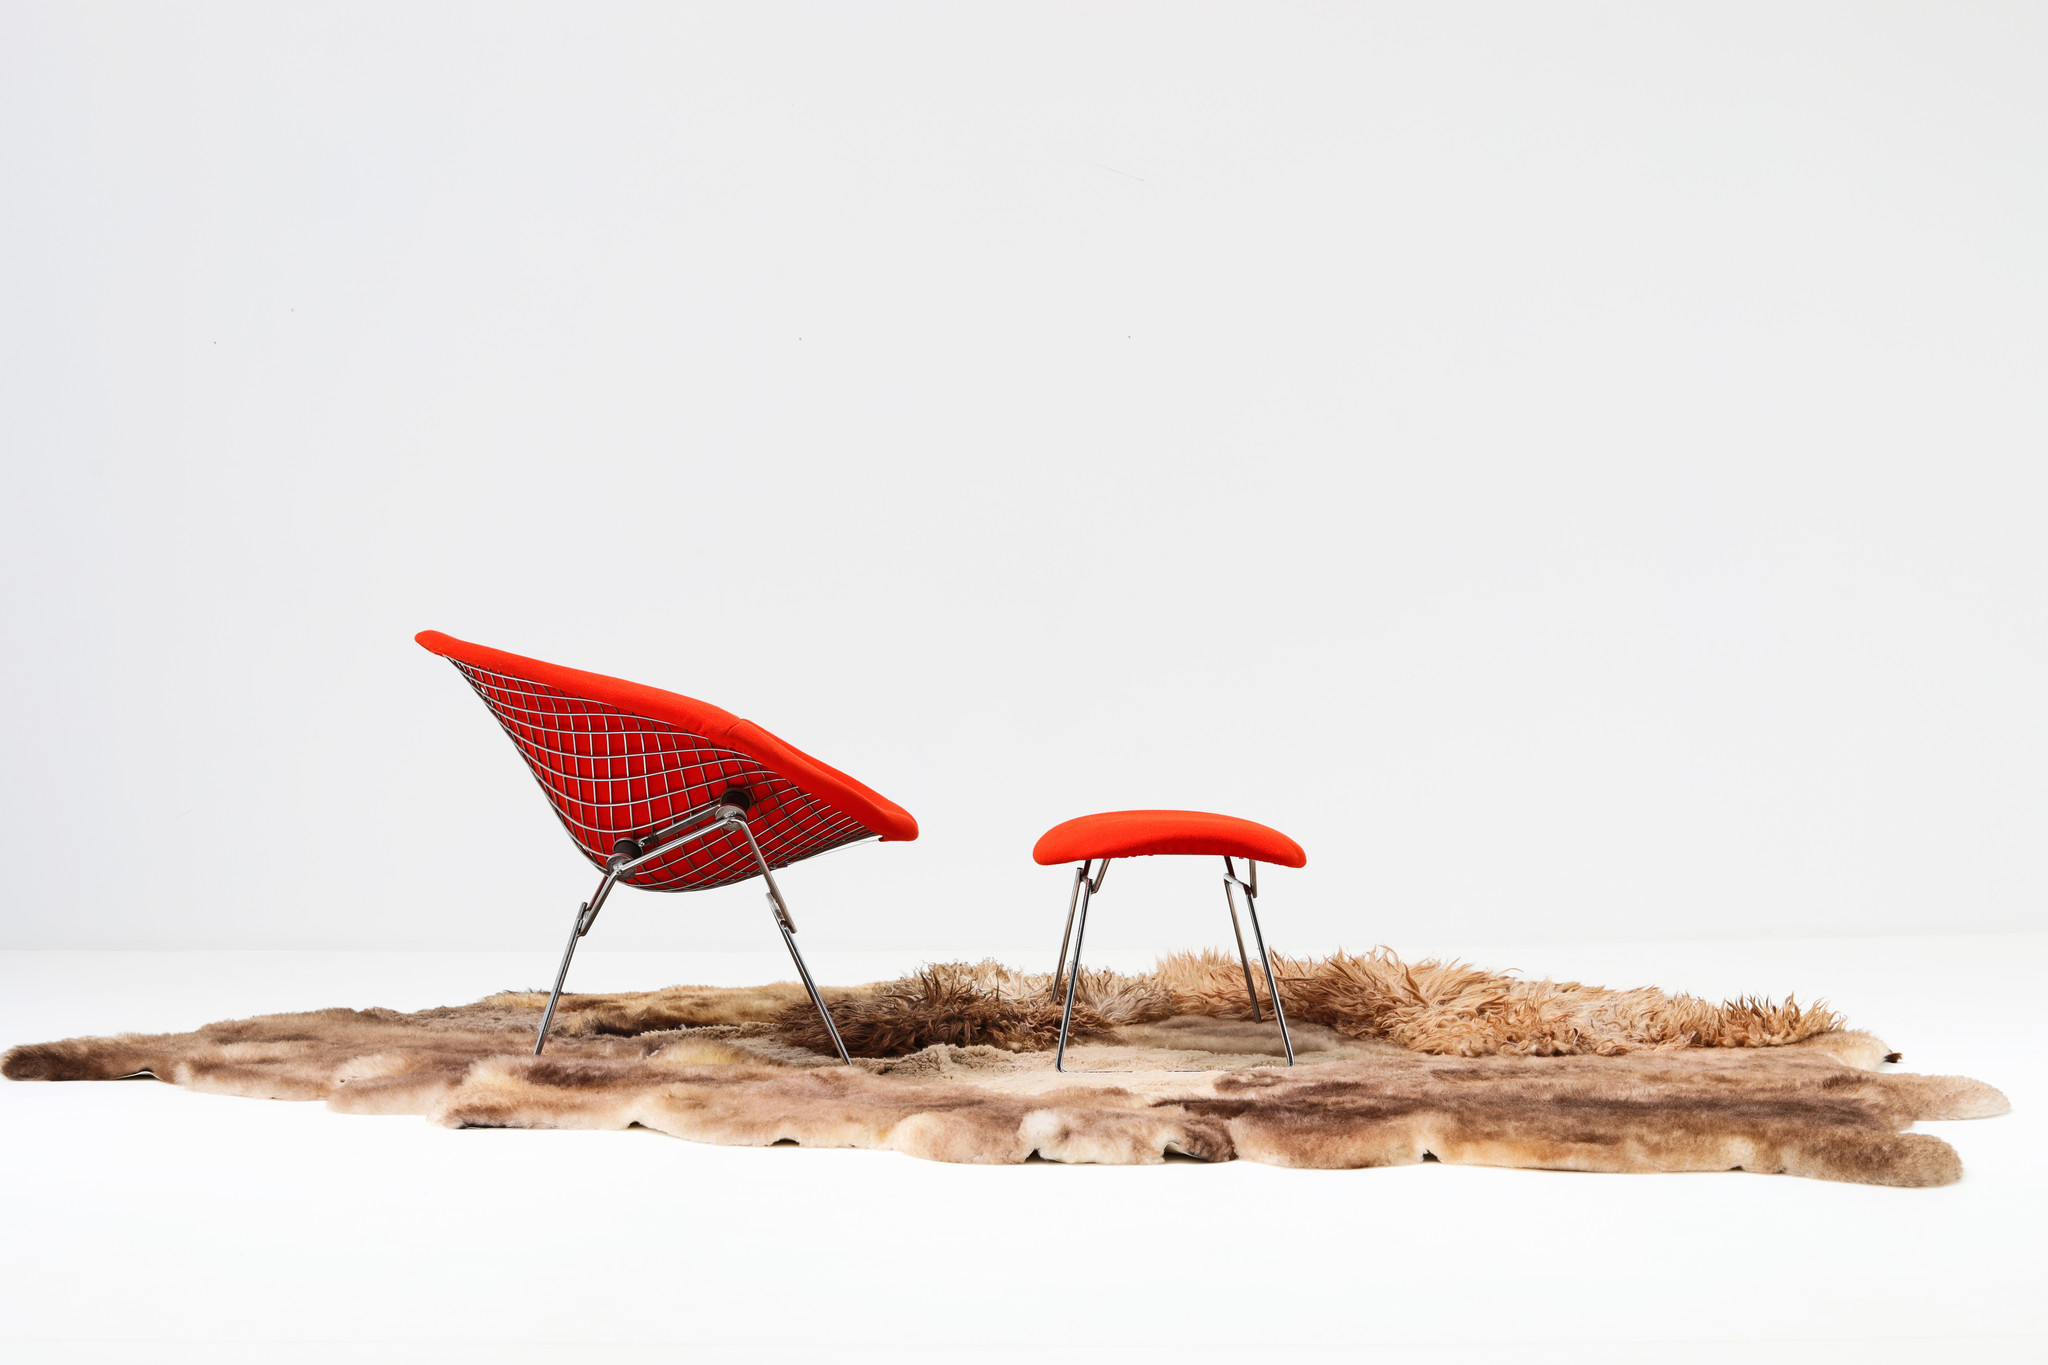 Diamond Chair "large" by Harry Bertoia for Knoll International